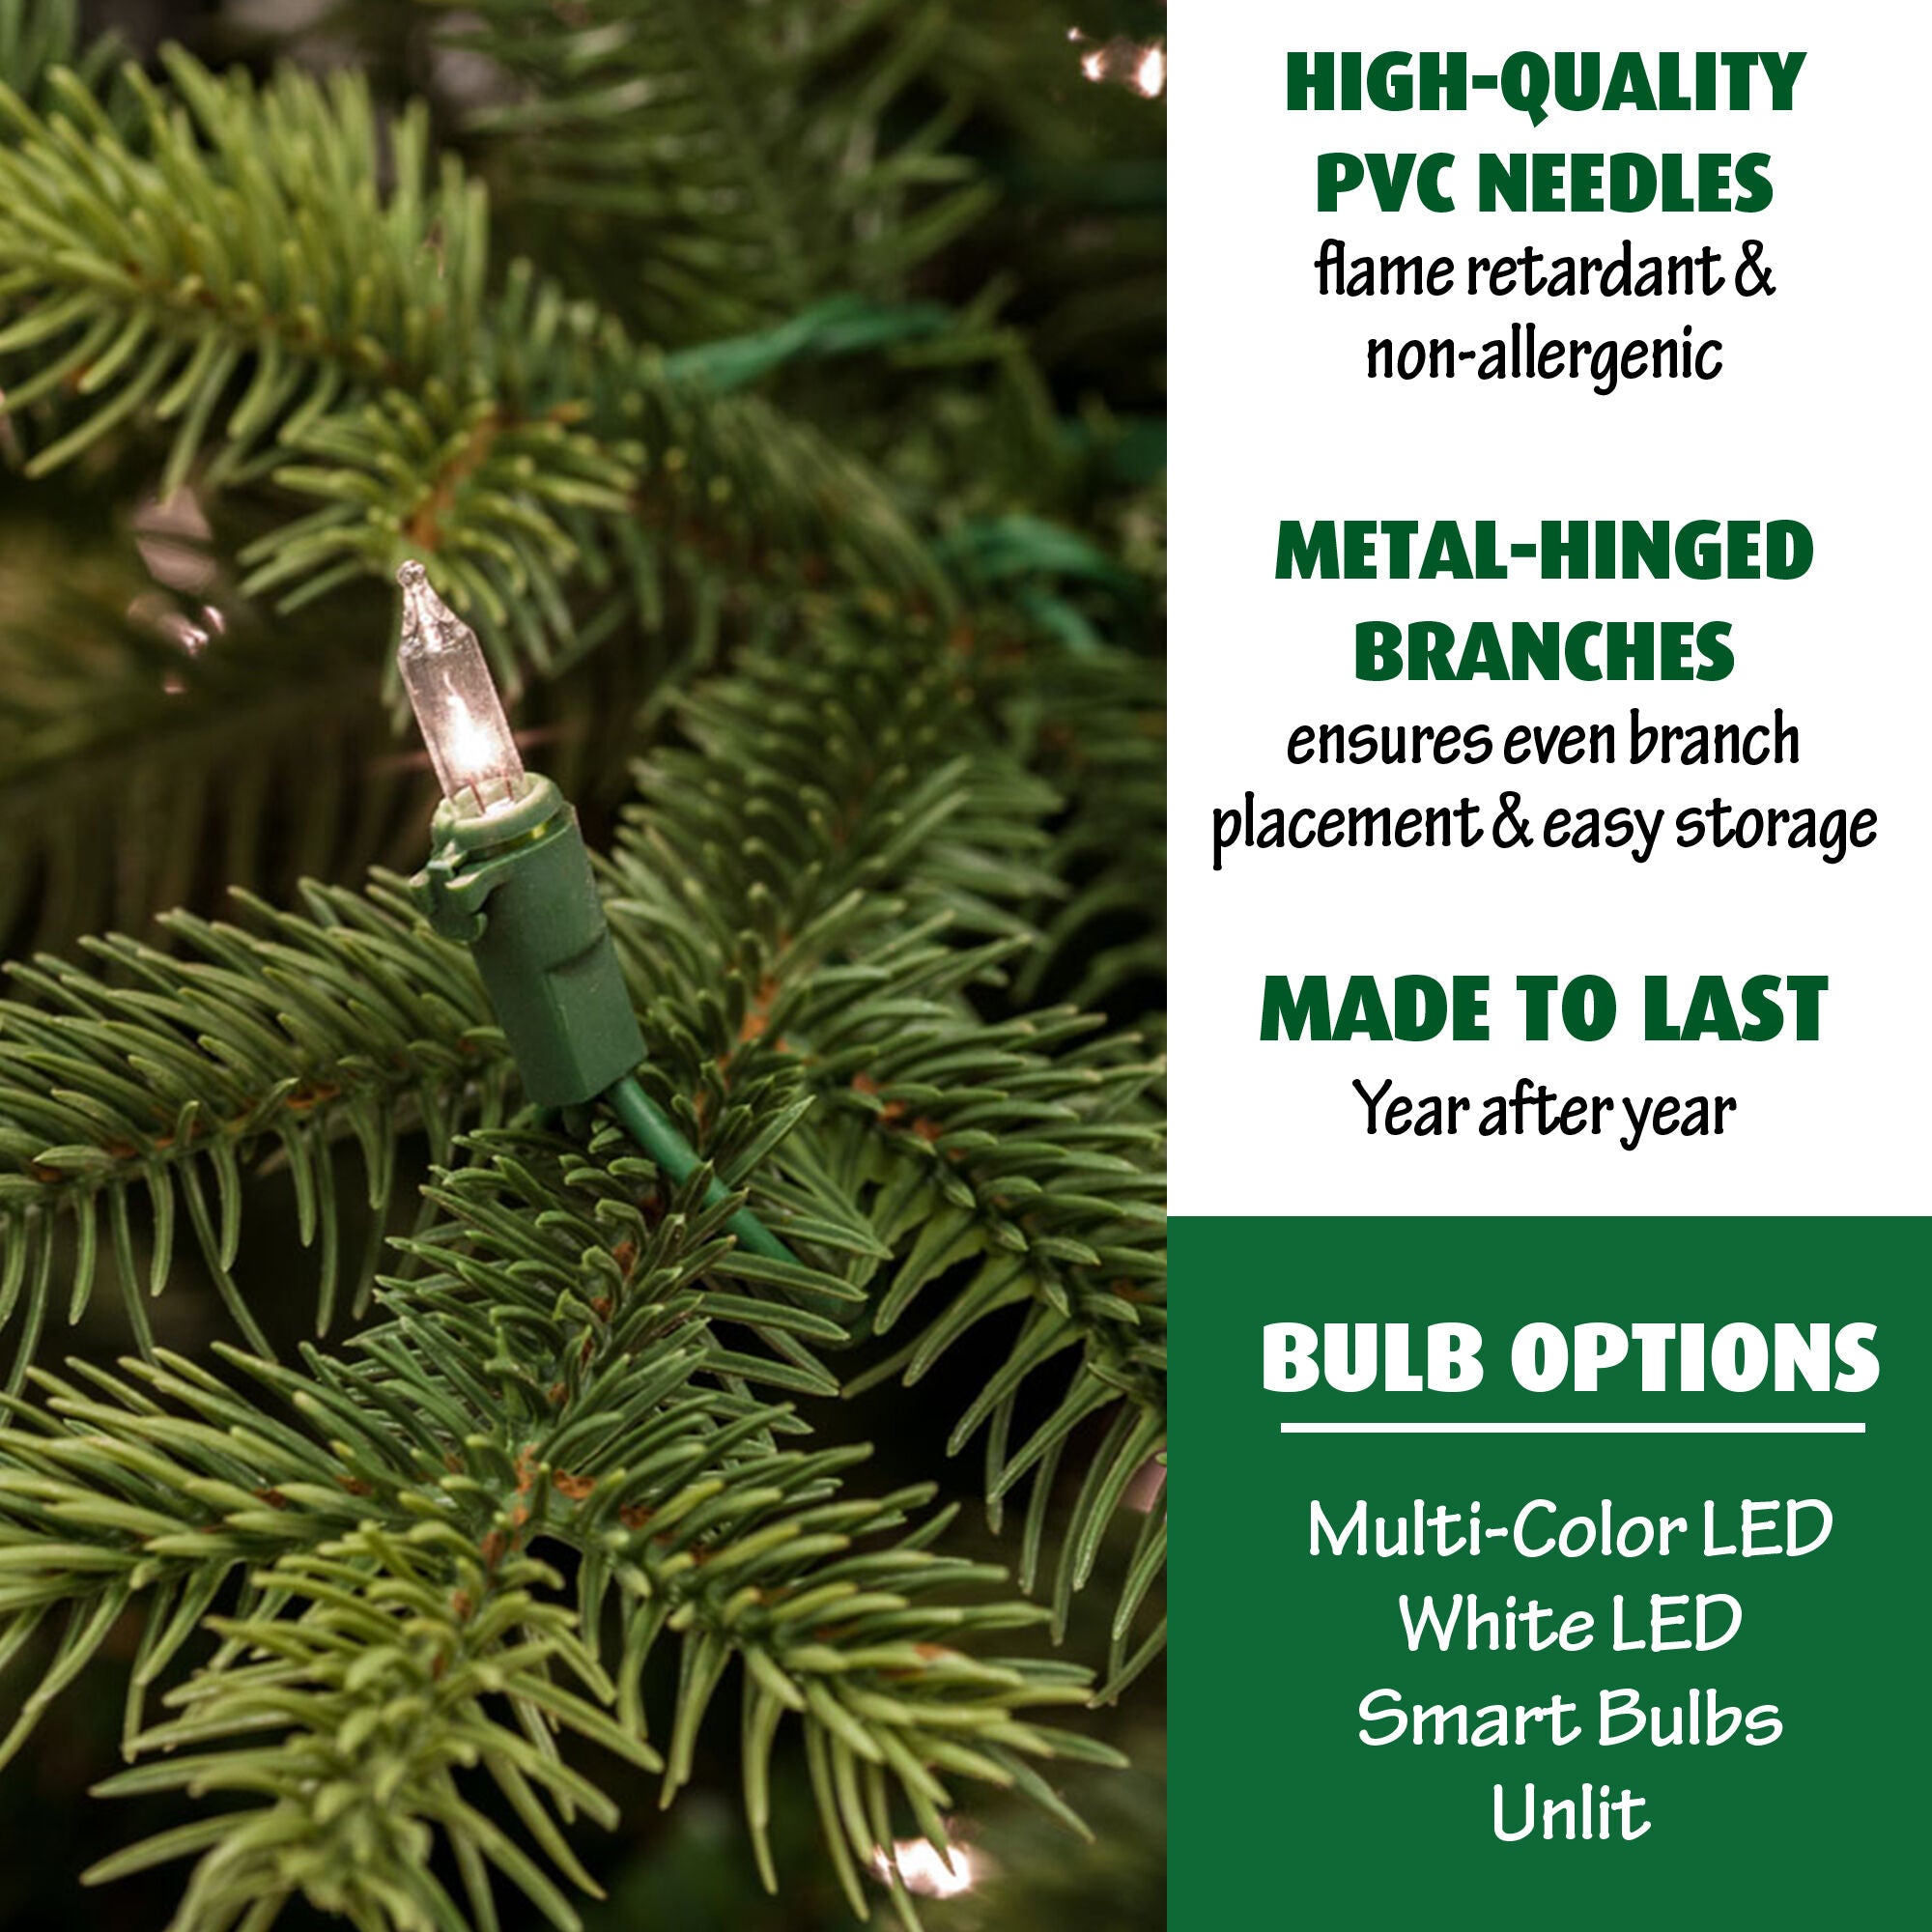 Fraser Hill Farm -  Set of Two 3-Ft. Noble Fir Artificial Trees with Metallic Urn Bases and Battery-Operated LED String Lights